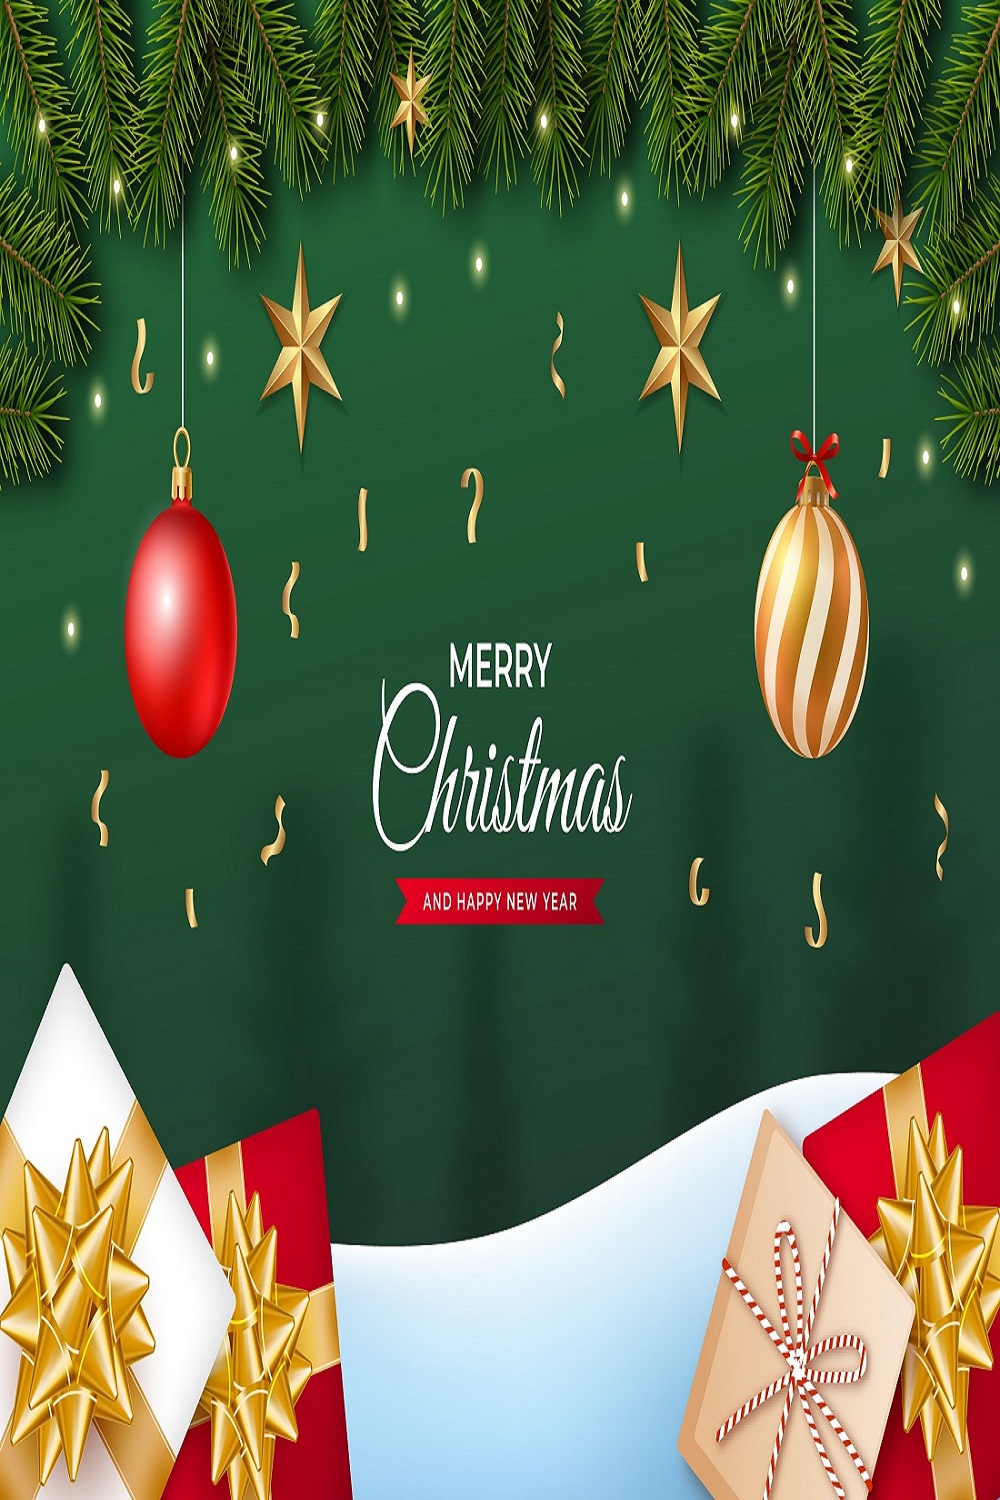 Merry Christmas background pinterest preview image.